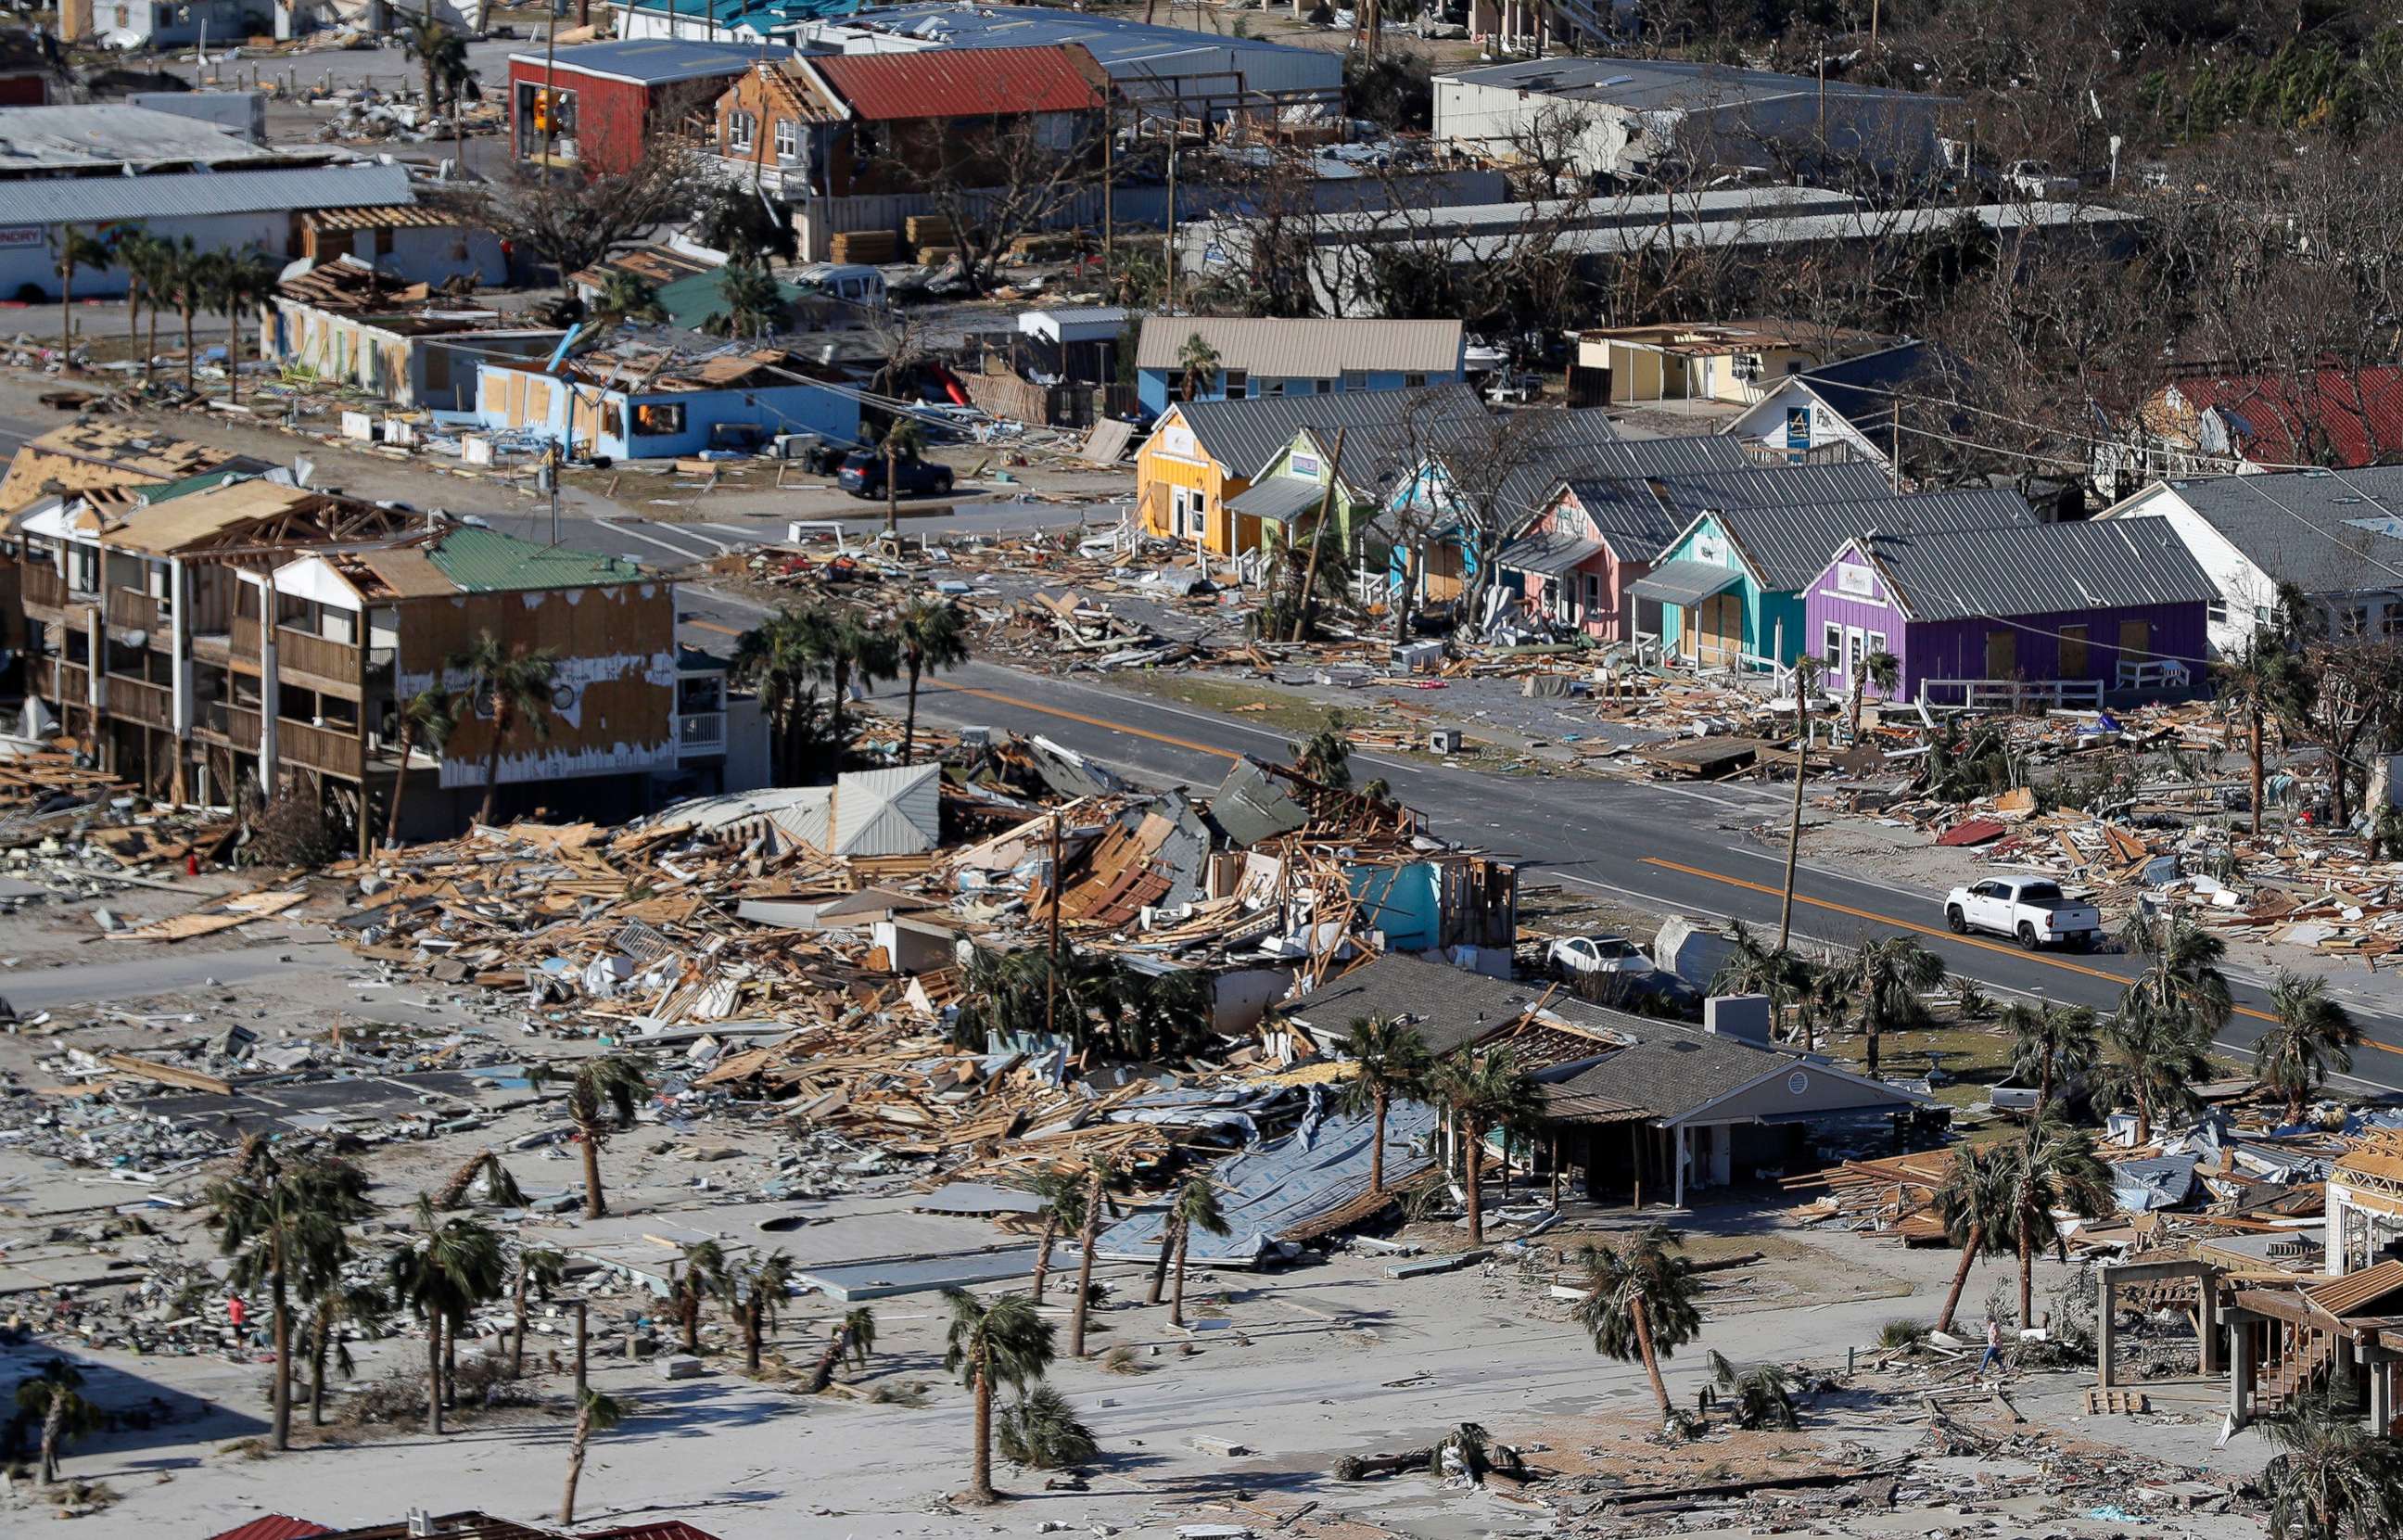 PHOTO: In this Oct. 12, 2018, file photo, debris from homes destroyed by Hurricane Michael litters the ground in Mexico Beach, Fla.